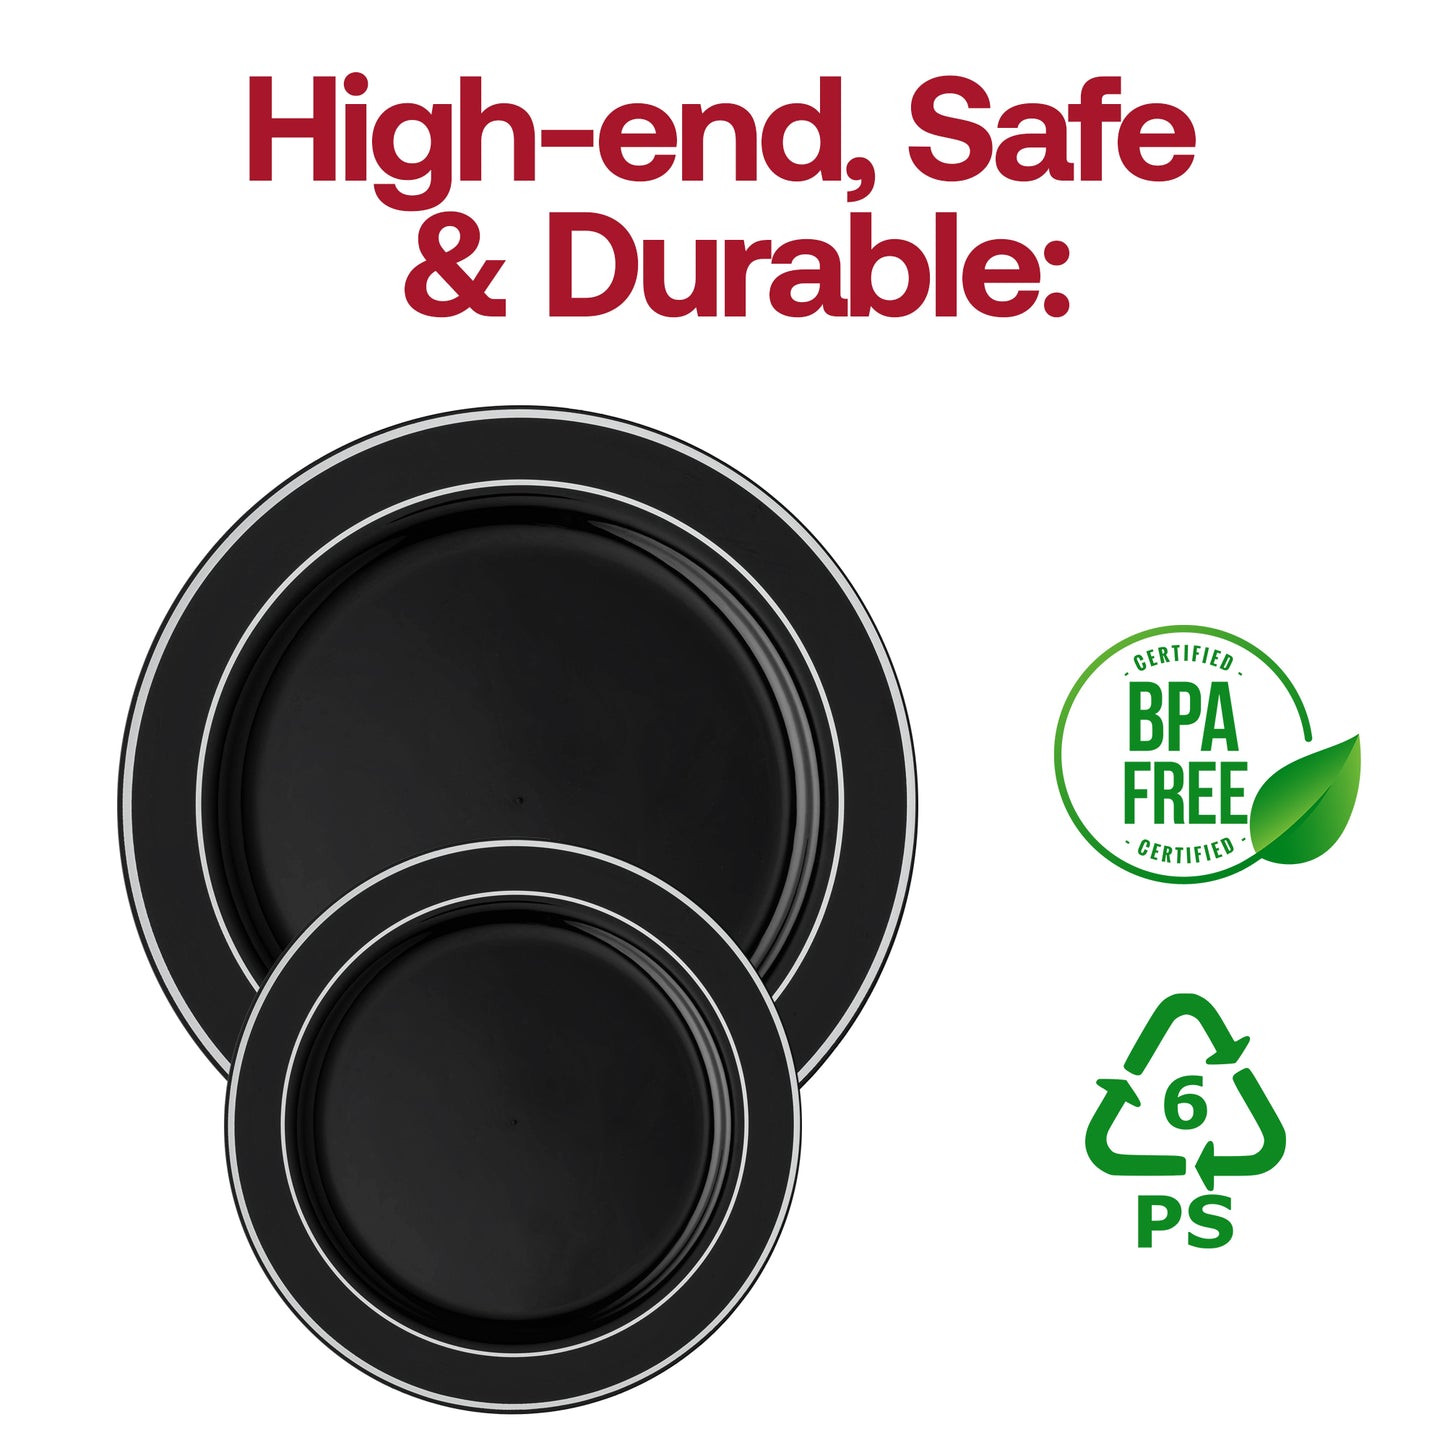 Black with Silver Edge Rim Plastic Dinner Plates (10.25") BPA | The Kaya Collection